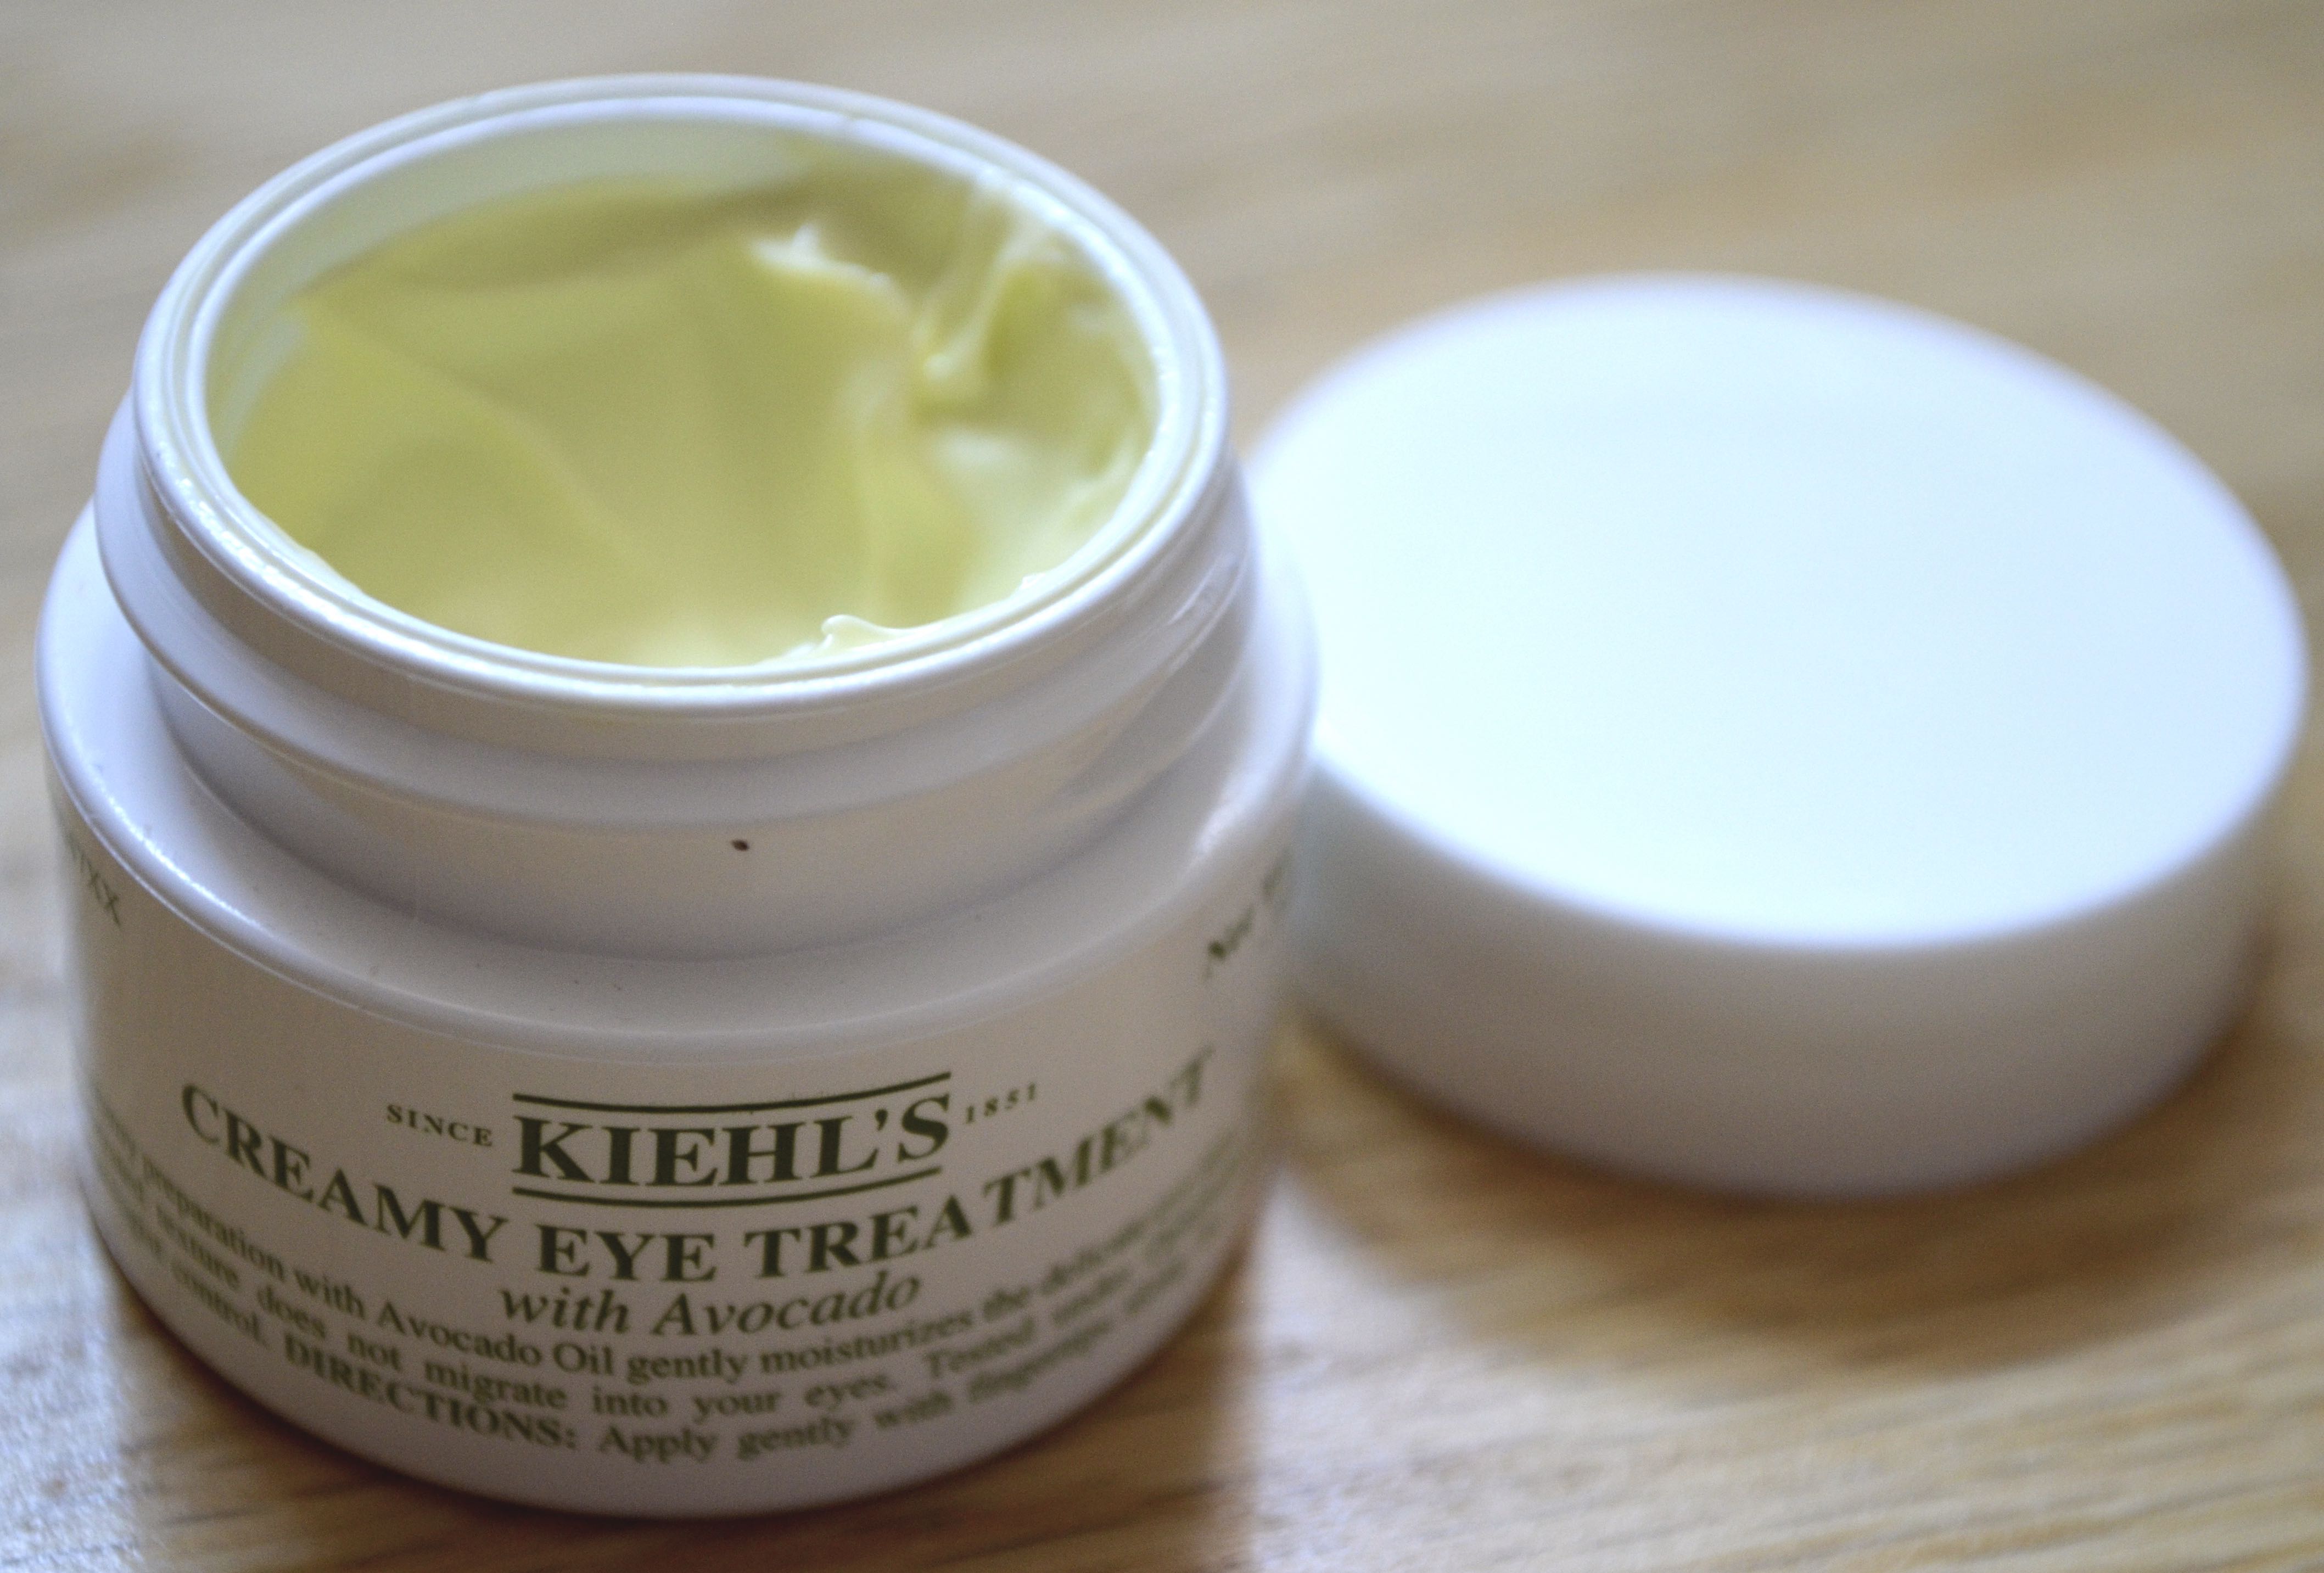 Kiehls eye cream - Beauty Finds for the summer at www.laughlovekiss.com